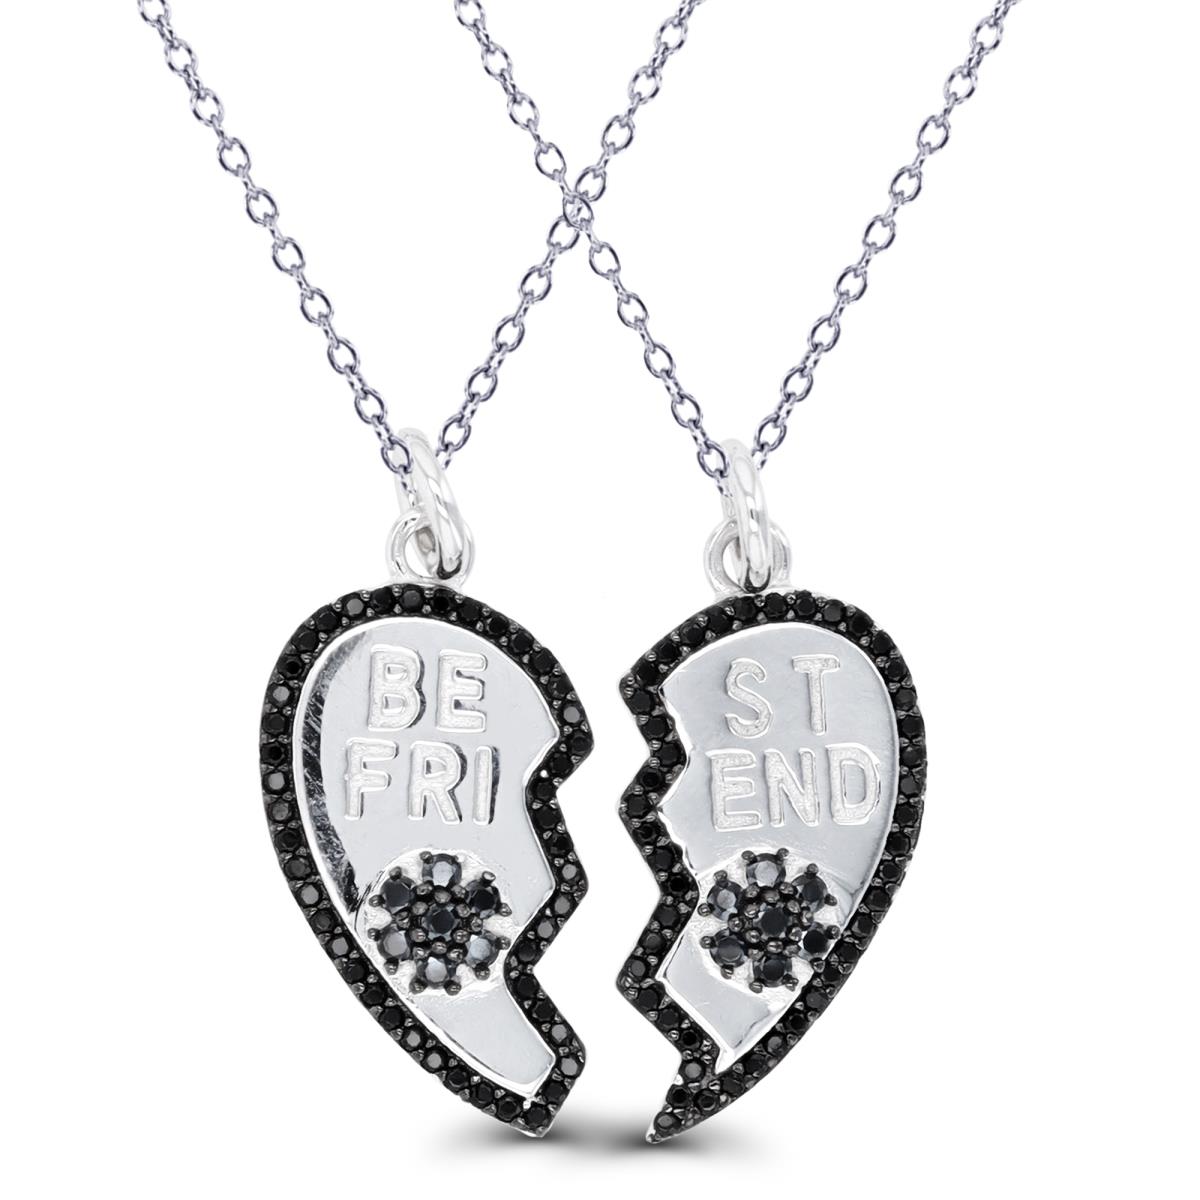 Sterling Silver Rhodium & Black Rnd Black Spinel "Be Friend" Divided Heart 18" Necklace (2 Chains)